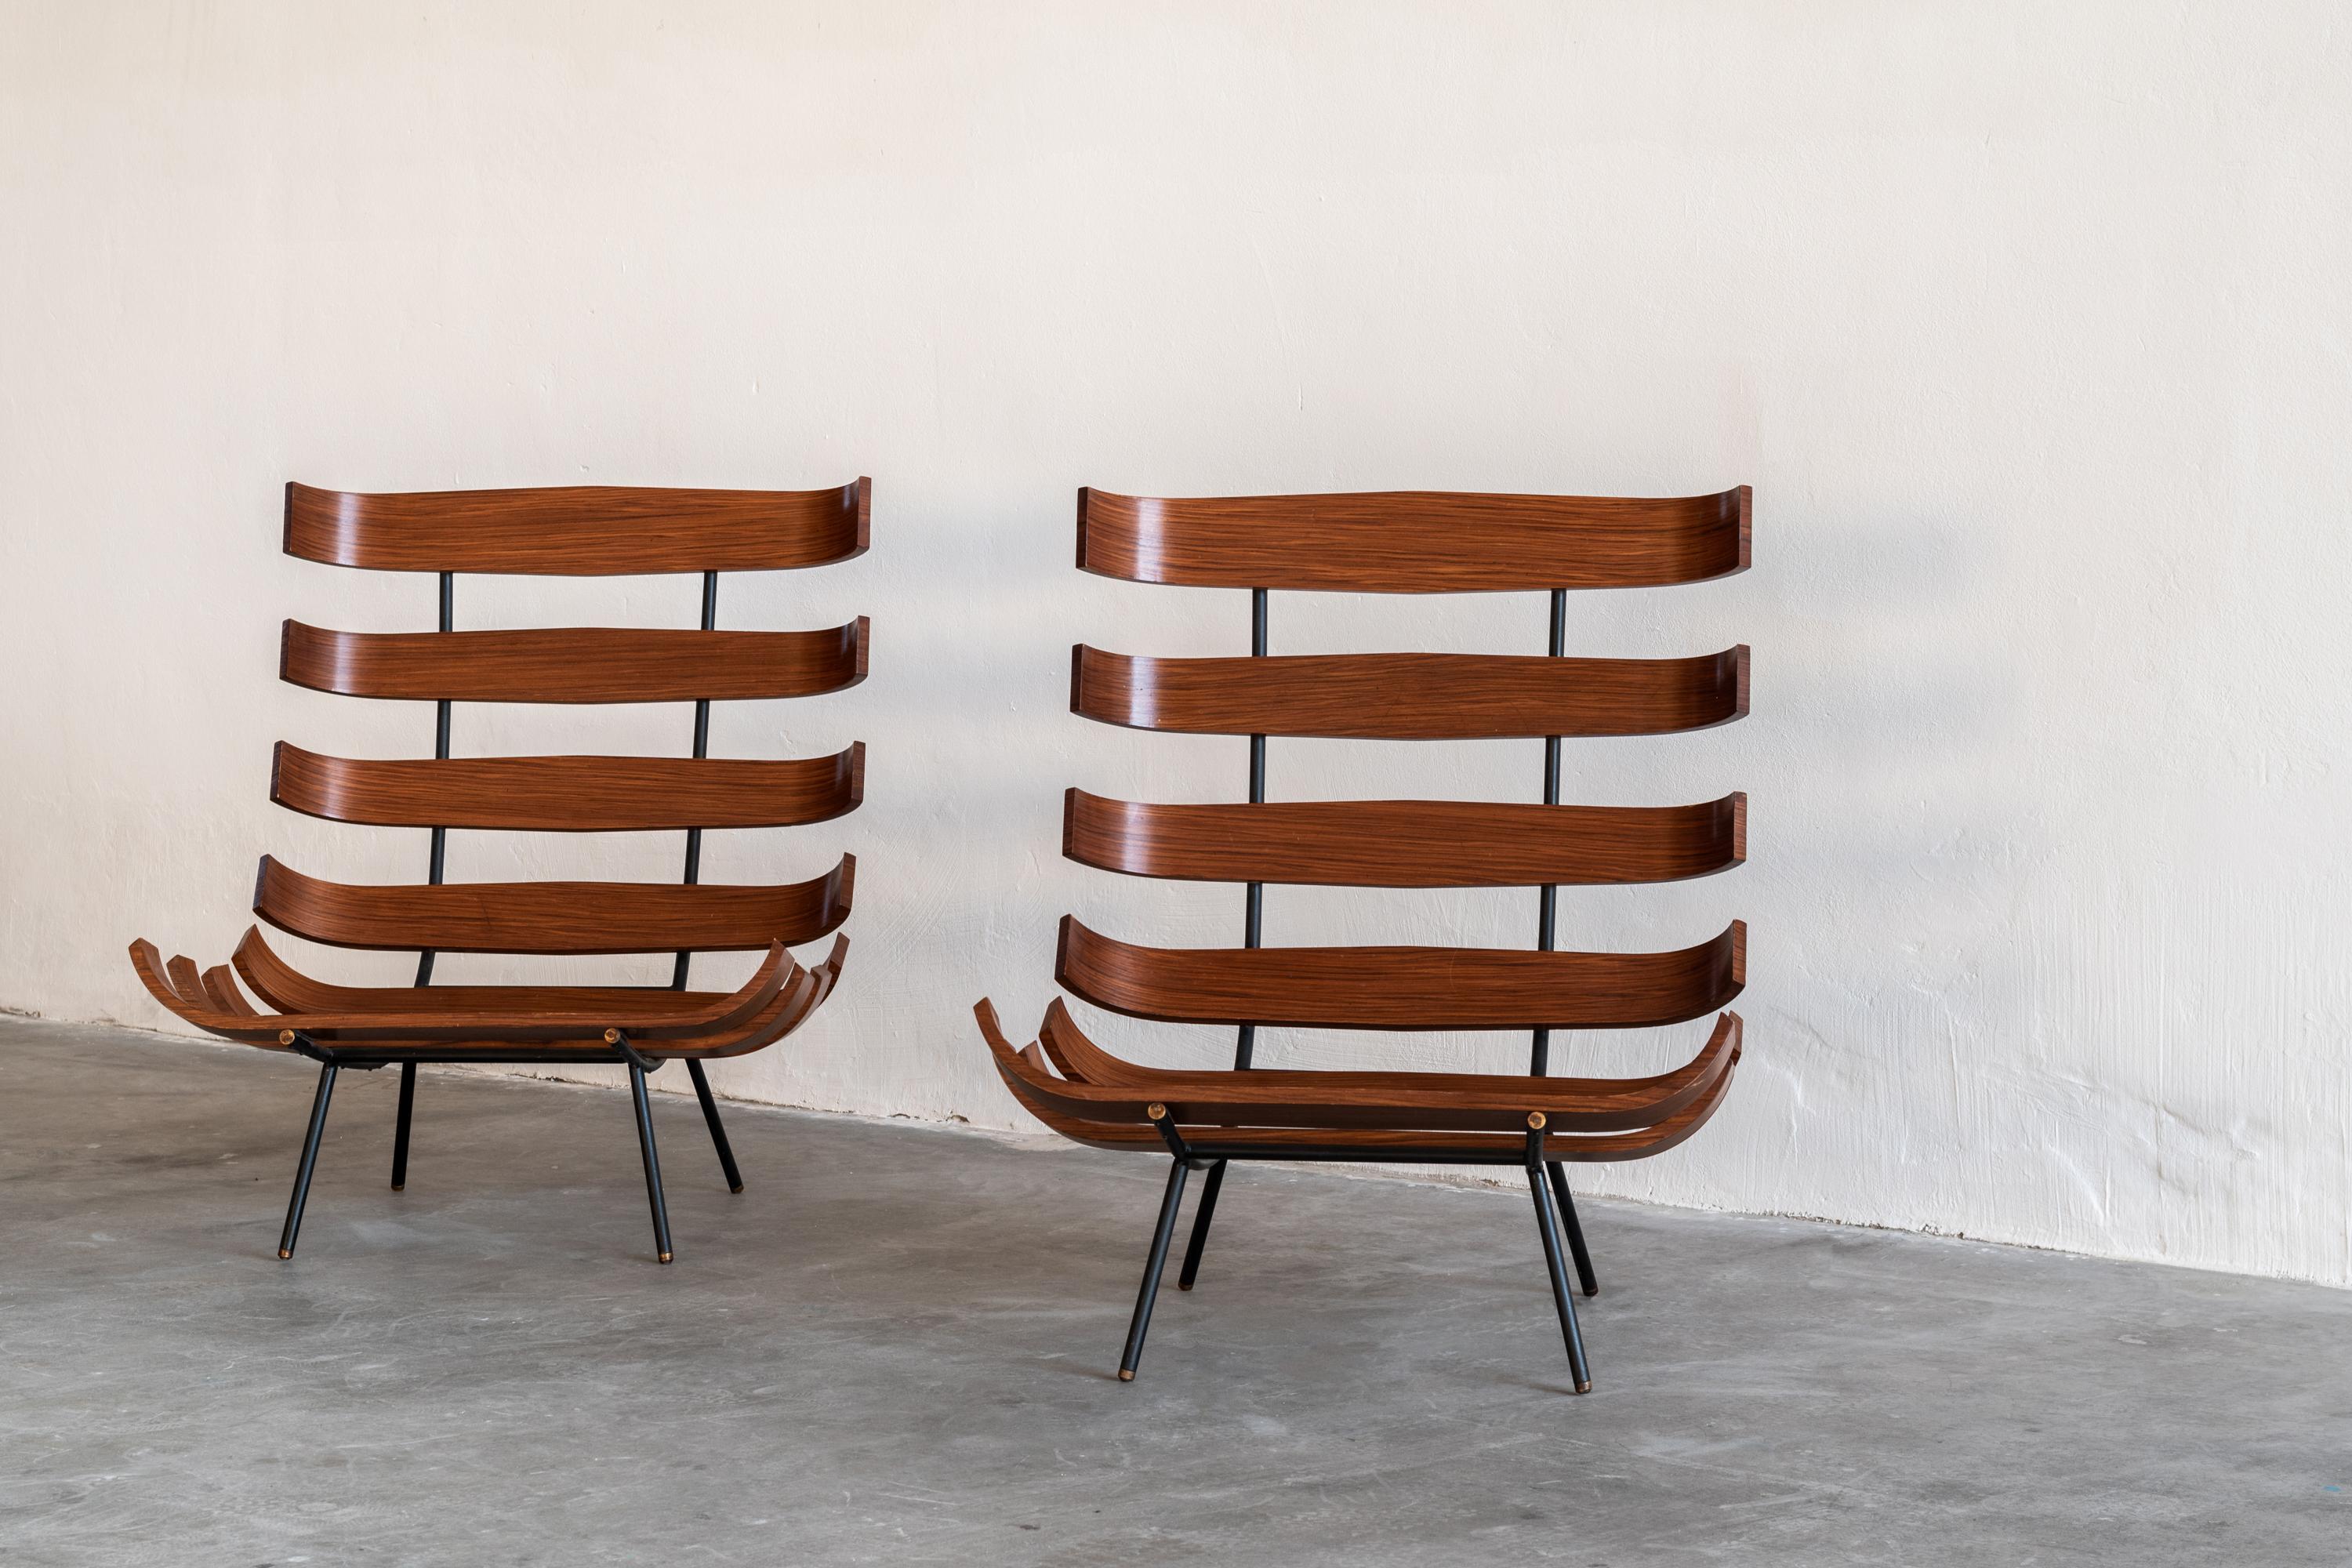 Costela chairs designed by Carlo Hauner & Martin Eisler for Forma (Brazil, 1950).
Seating with a structure in lacquered iron and solid wood.
Two chairs are available.
   